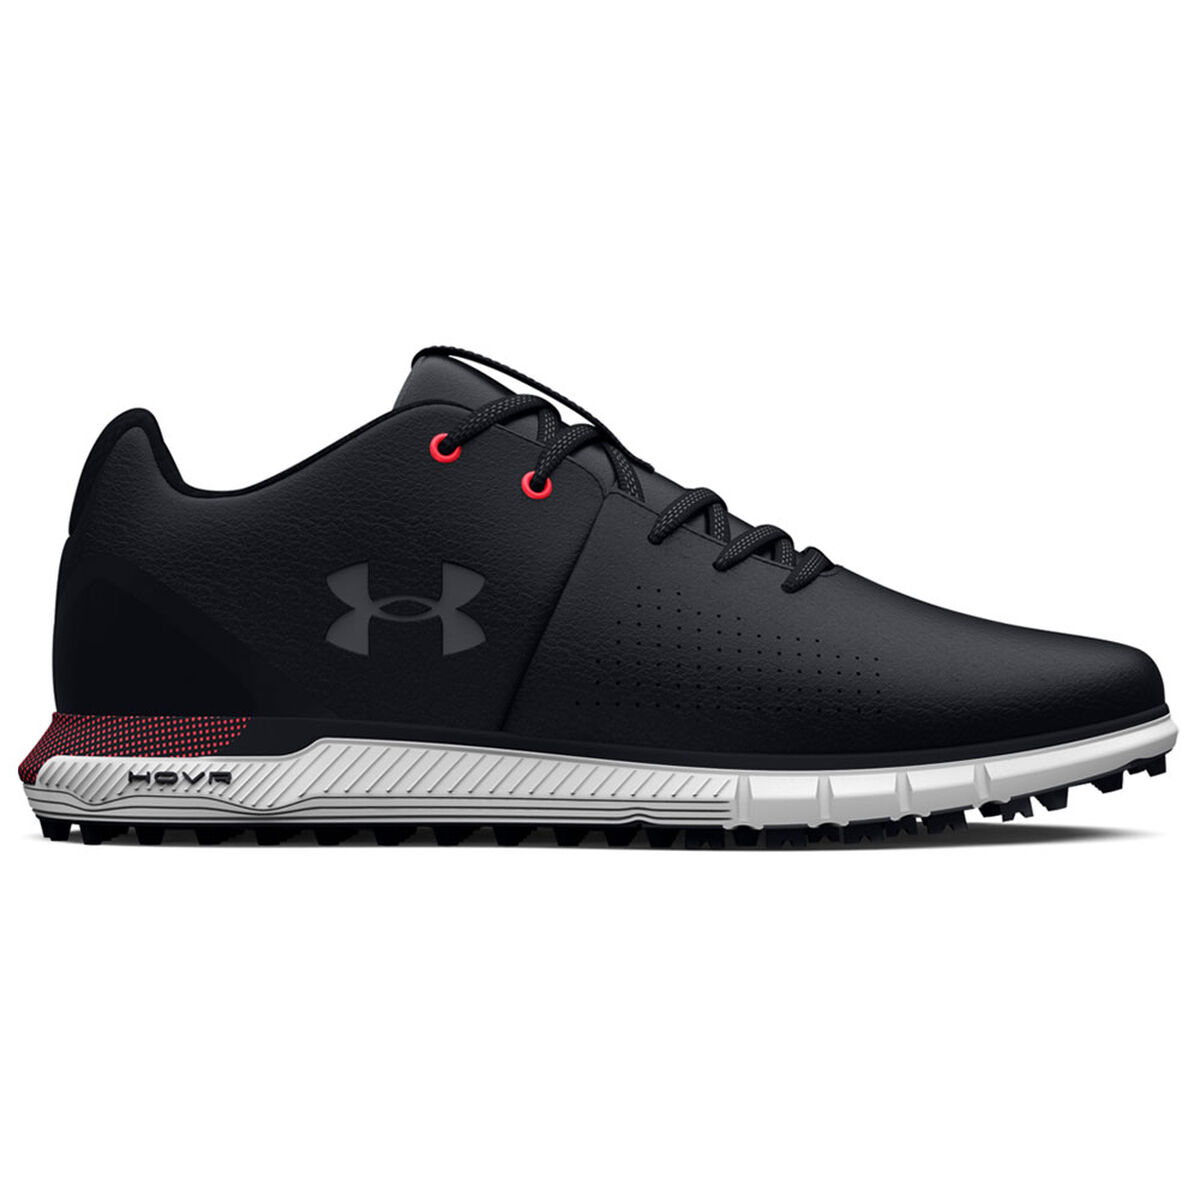 Under Armour Men’s Black and Grey HOVR Fade 2 Spikeless Golf Shoes, Size: 7 | American Golf